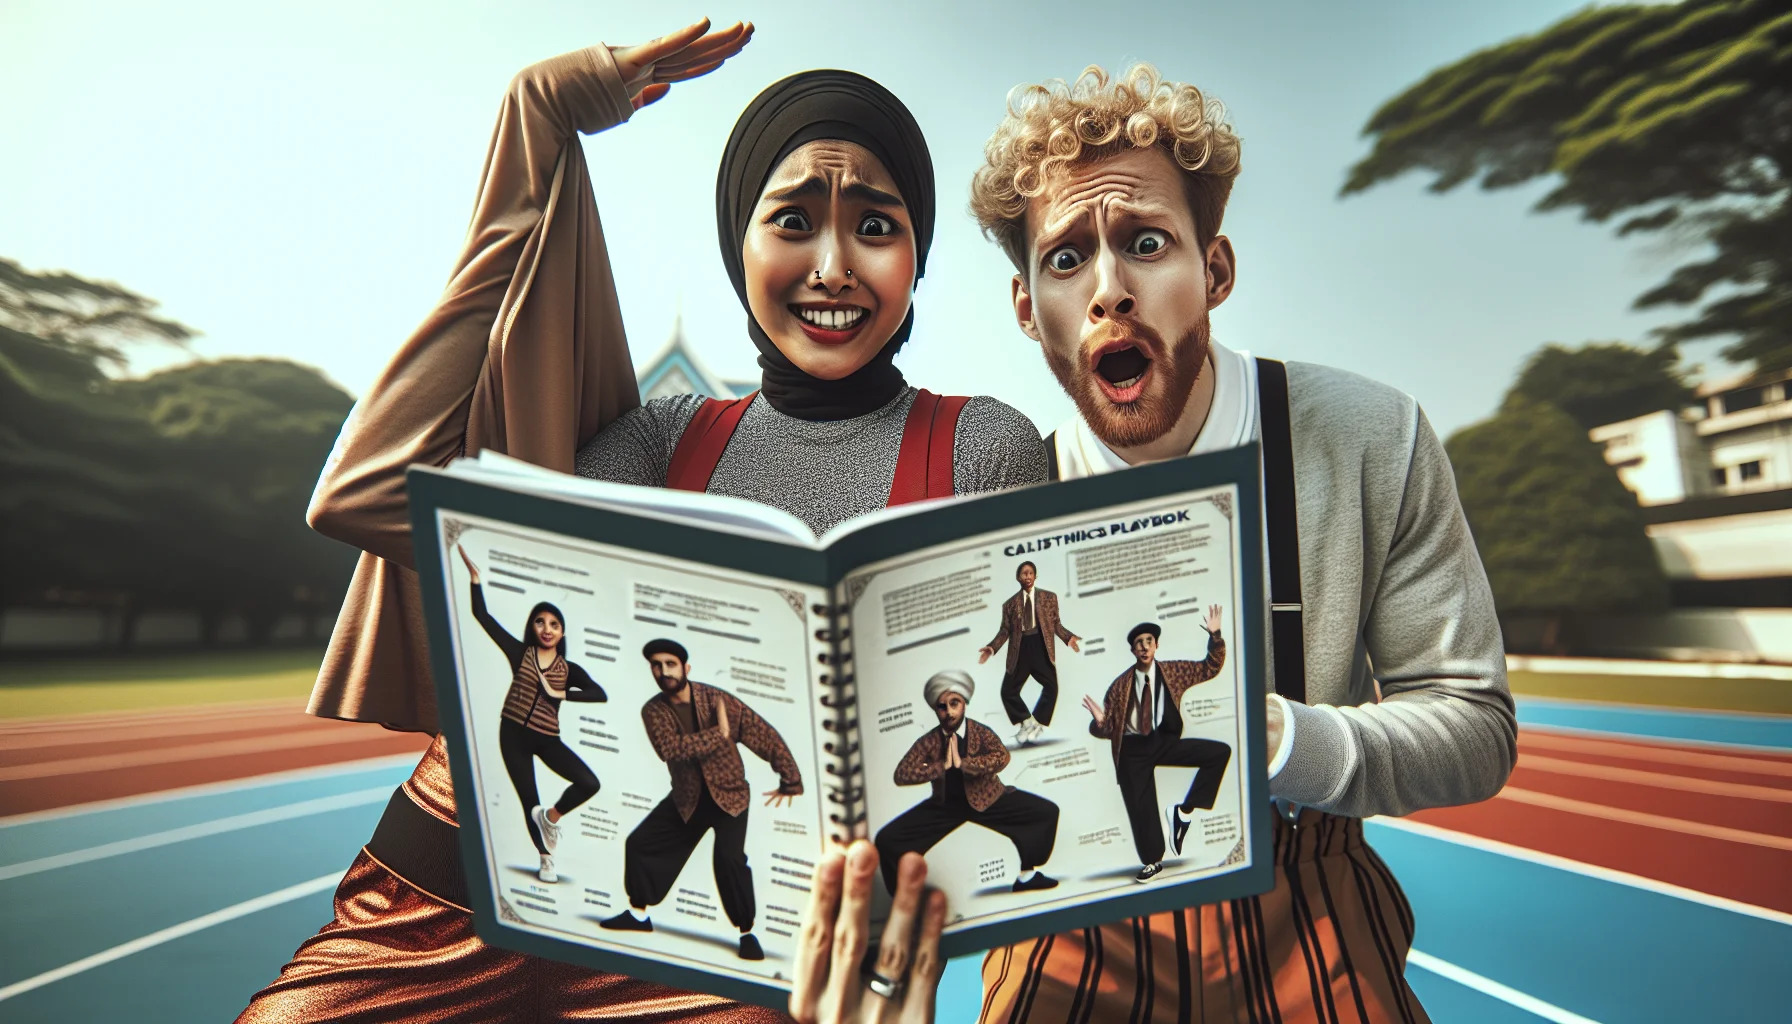 Generate a realistic image showing a South Asian woman and a Caucasian man hilariously trying to follow a calisthenics playbook. The playbook could contain peculiar exercise illustrations with exaggerated features and funny captions. The duo could be seen in an outdoor setting, with their exaggerated attempts at the exercises creating a sense of fun and amusement. Their attire should reflect typical workout gears, and their expressions should be of determination mixed with a faint hint of confusion, making it obvious that they don't quite get the instructions, hence bringing a humorous vibe to the scene.